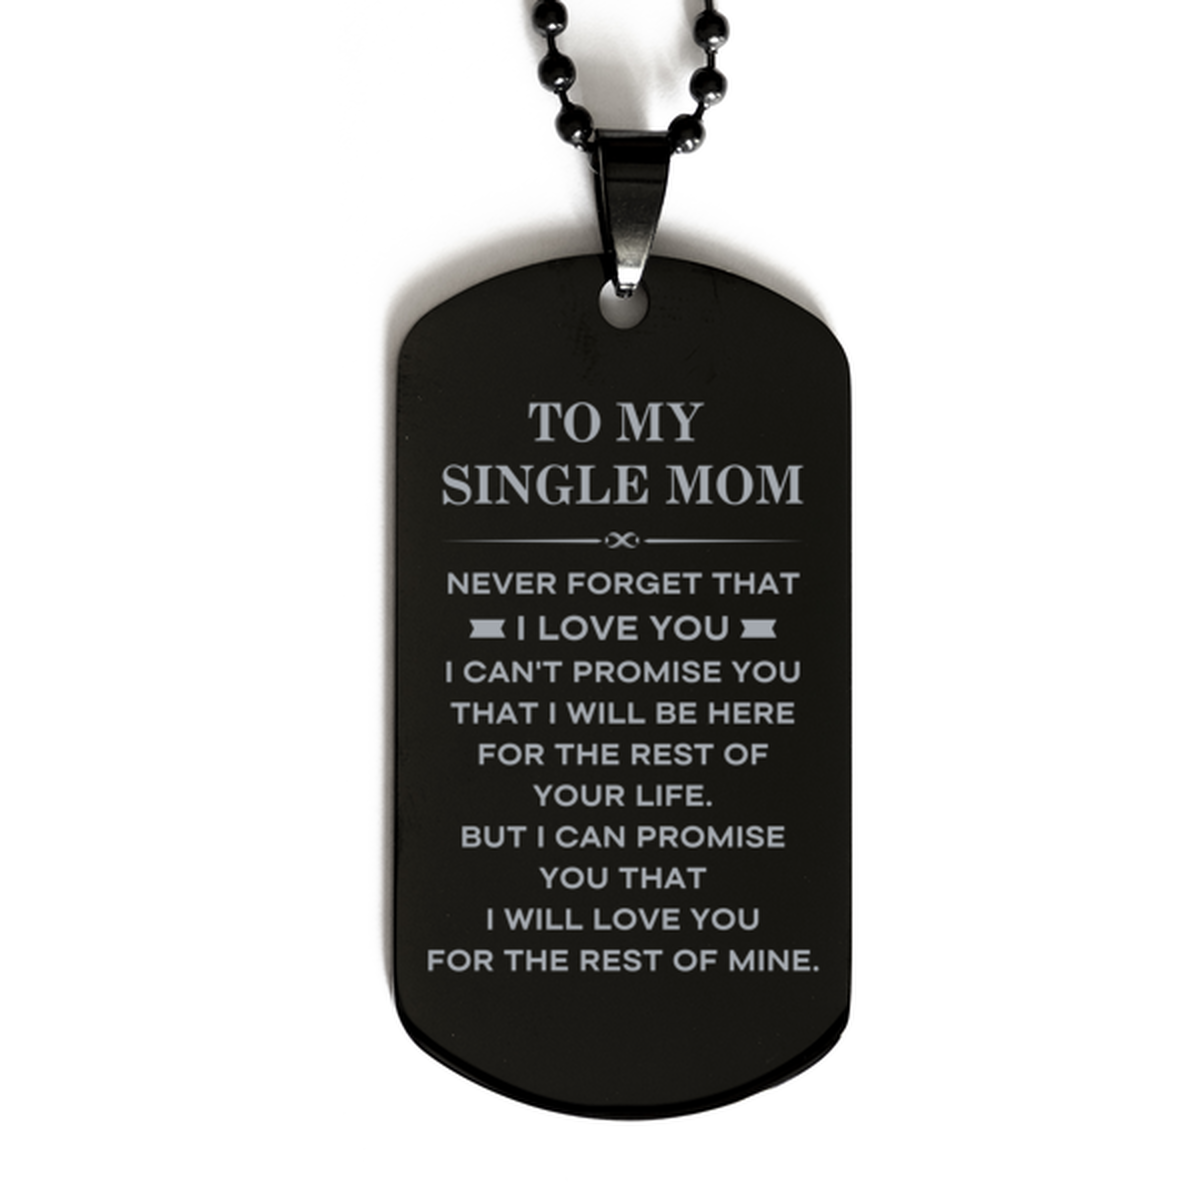 To My Single Mom Gifts, I will love you for the rest of mine, Love Single Mom Dog Tag Necklace, Birthday Christmas Unique Black Dog Tag For Single Mom